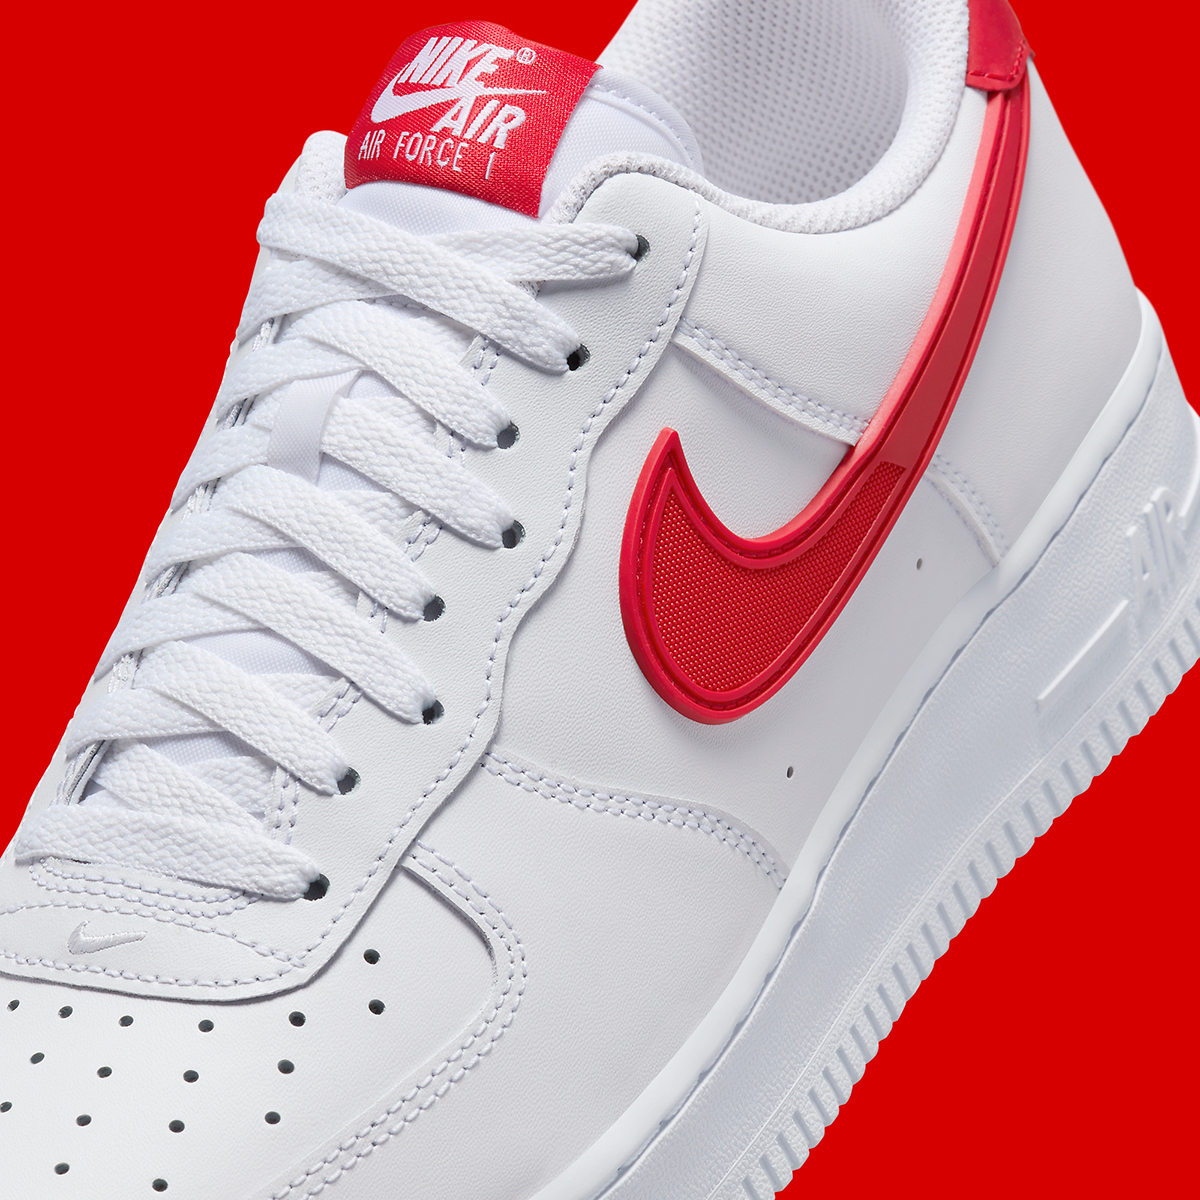 Nike Air Force 1 Low Swoosh Armor White Red Hf4291 100 8